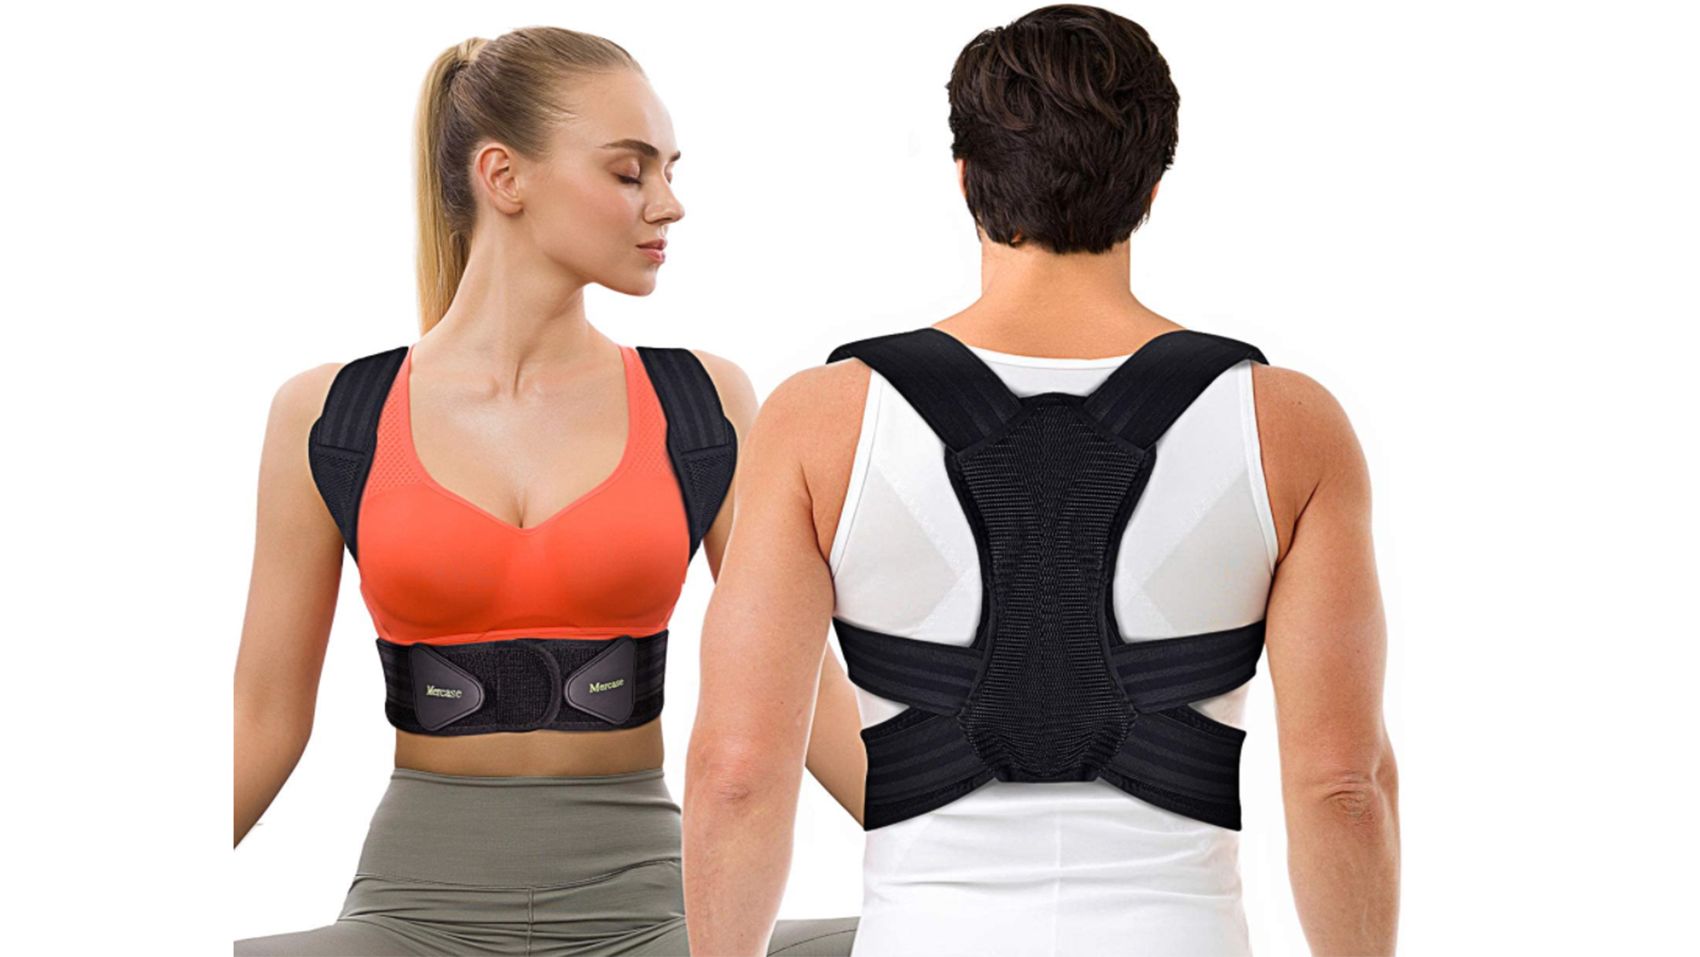 The 6 Best Back Braces to Fit Your Needs